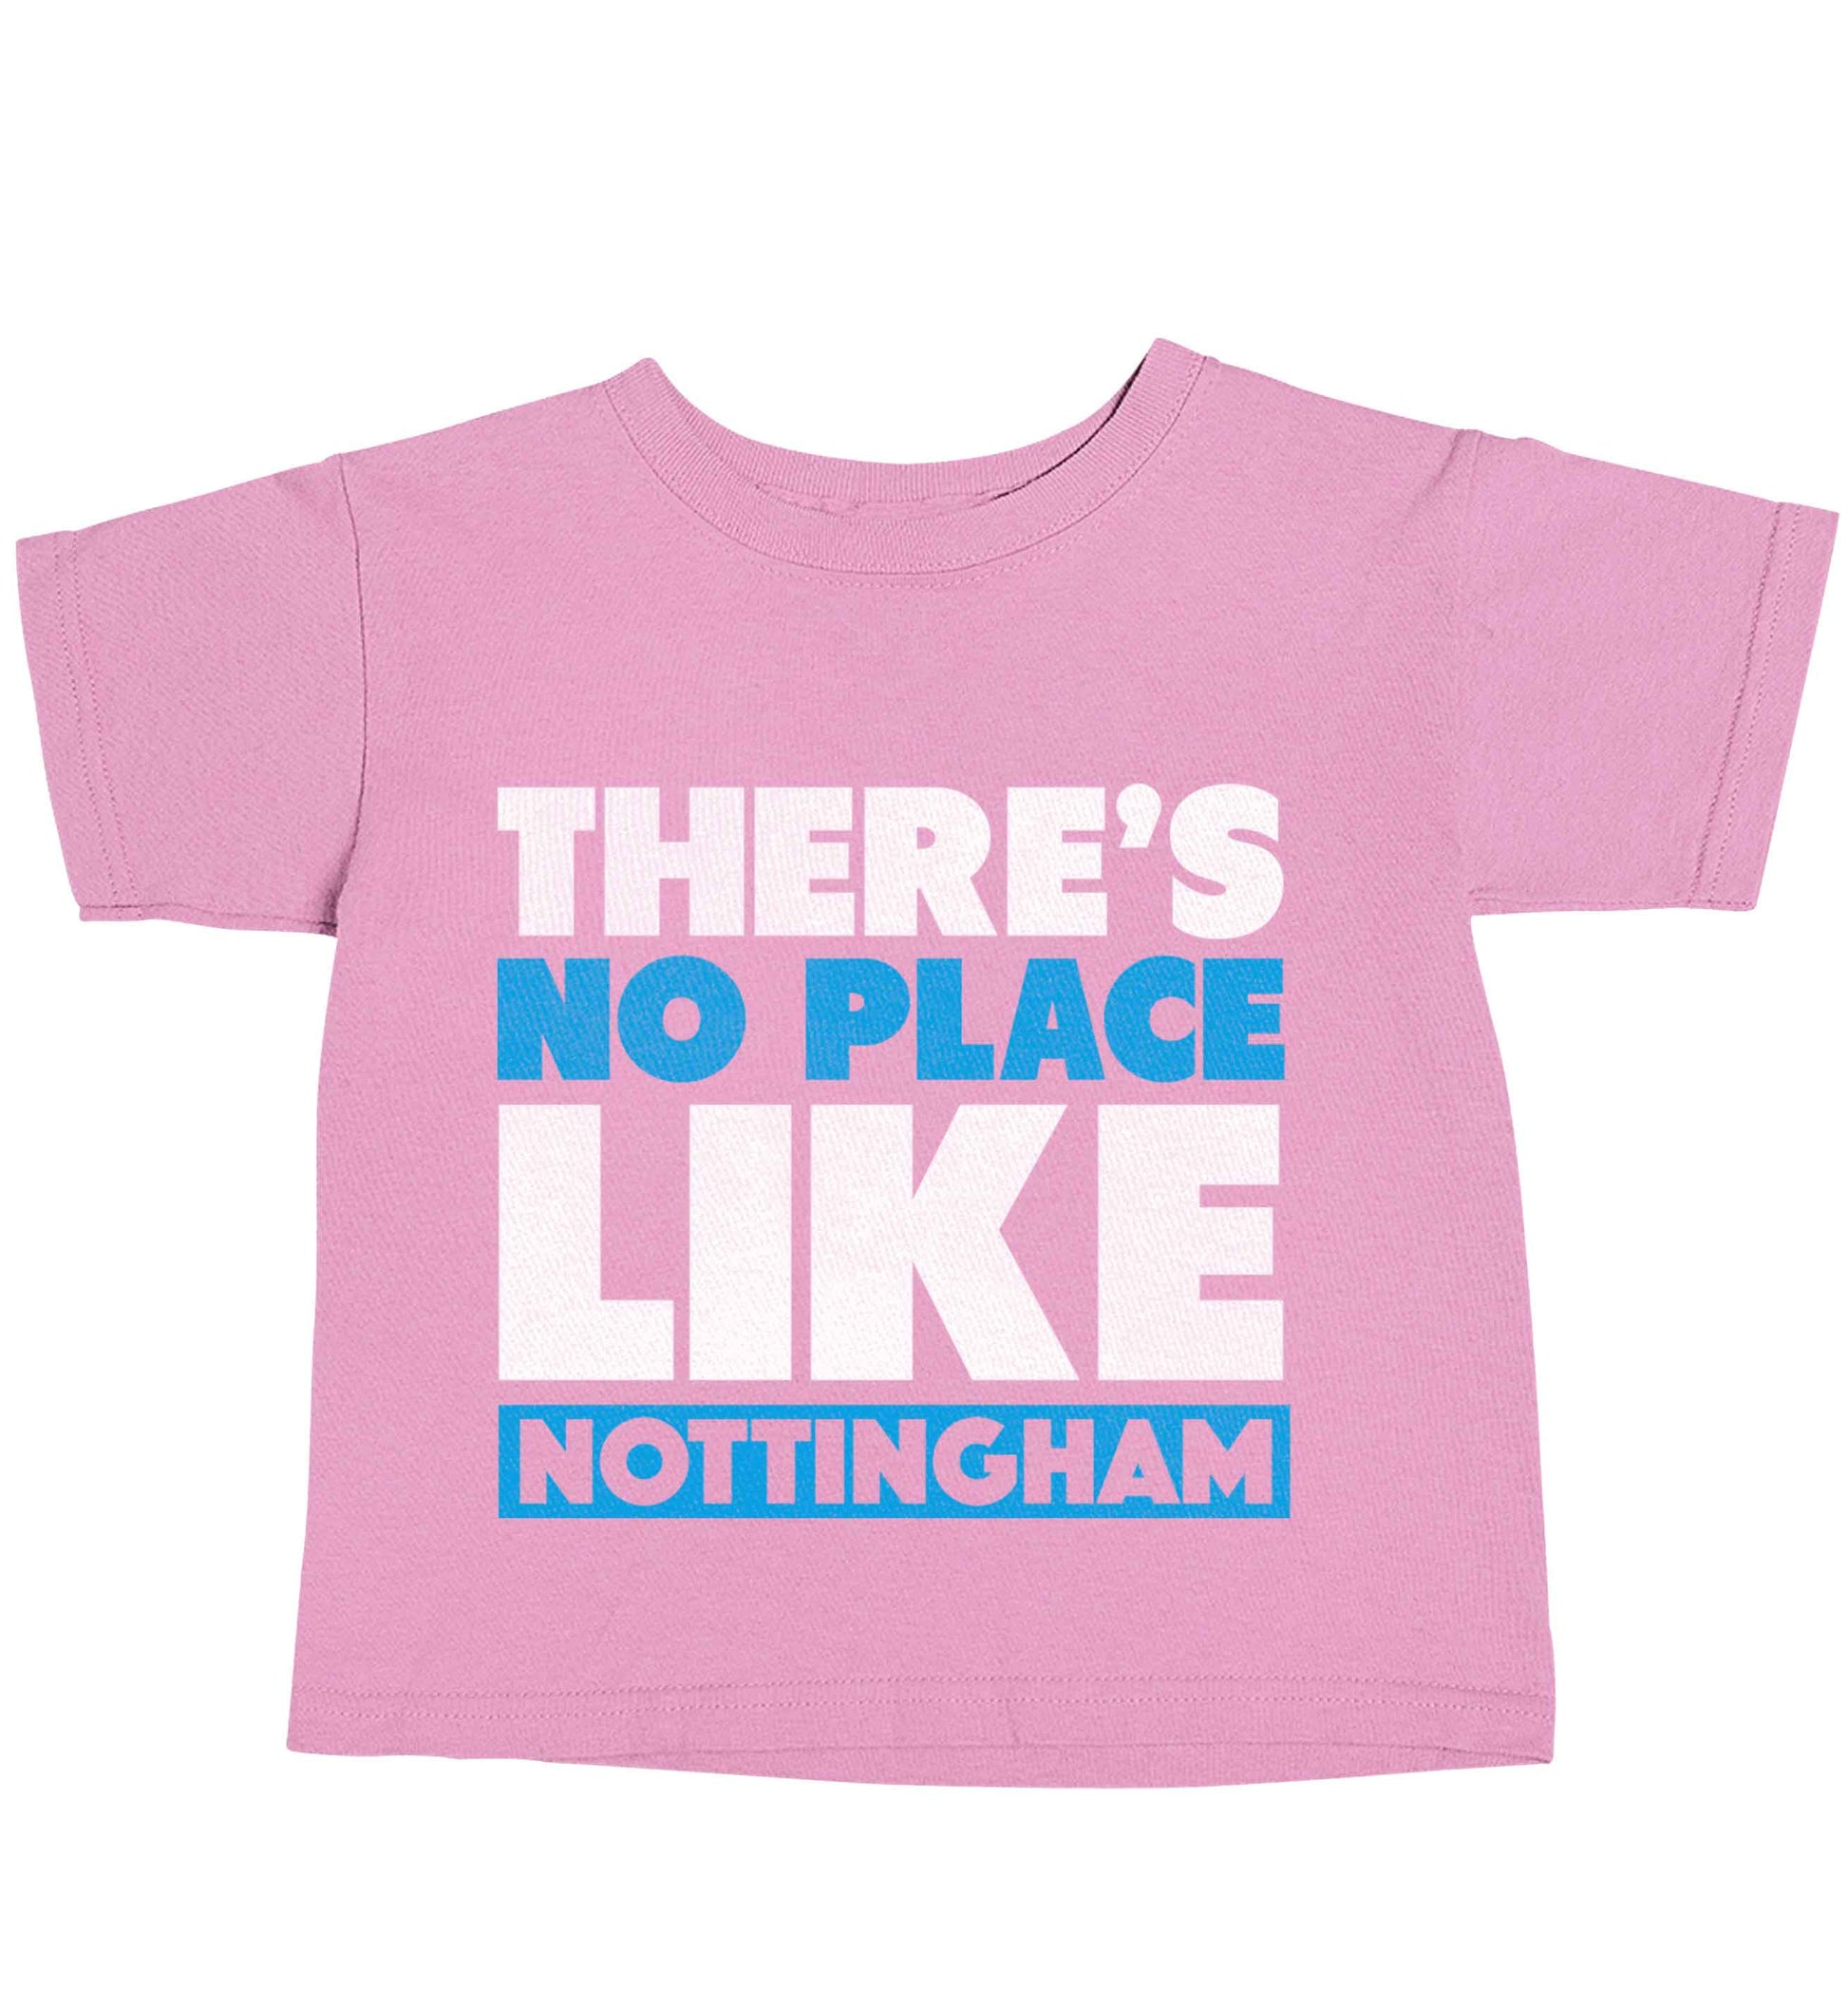 There's no place like Nottingham light pink baby toddler Tshirt 2 Years